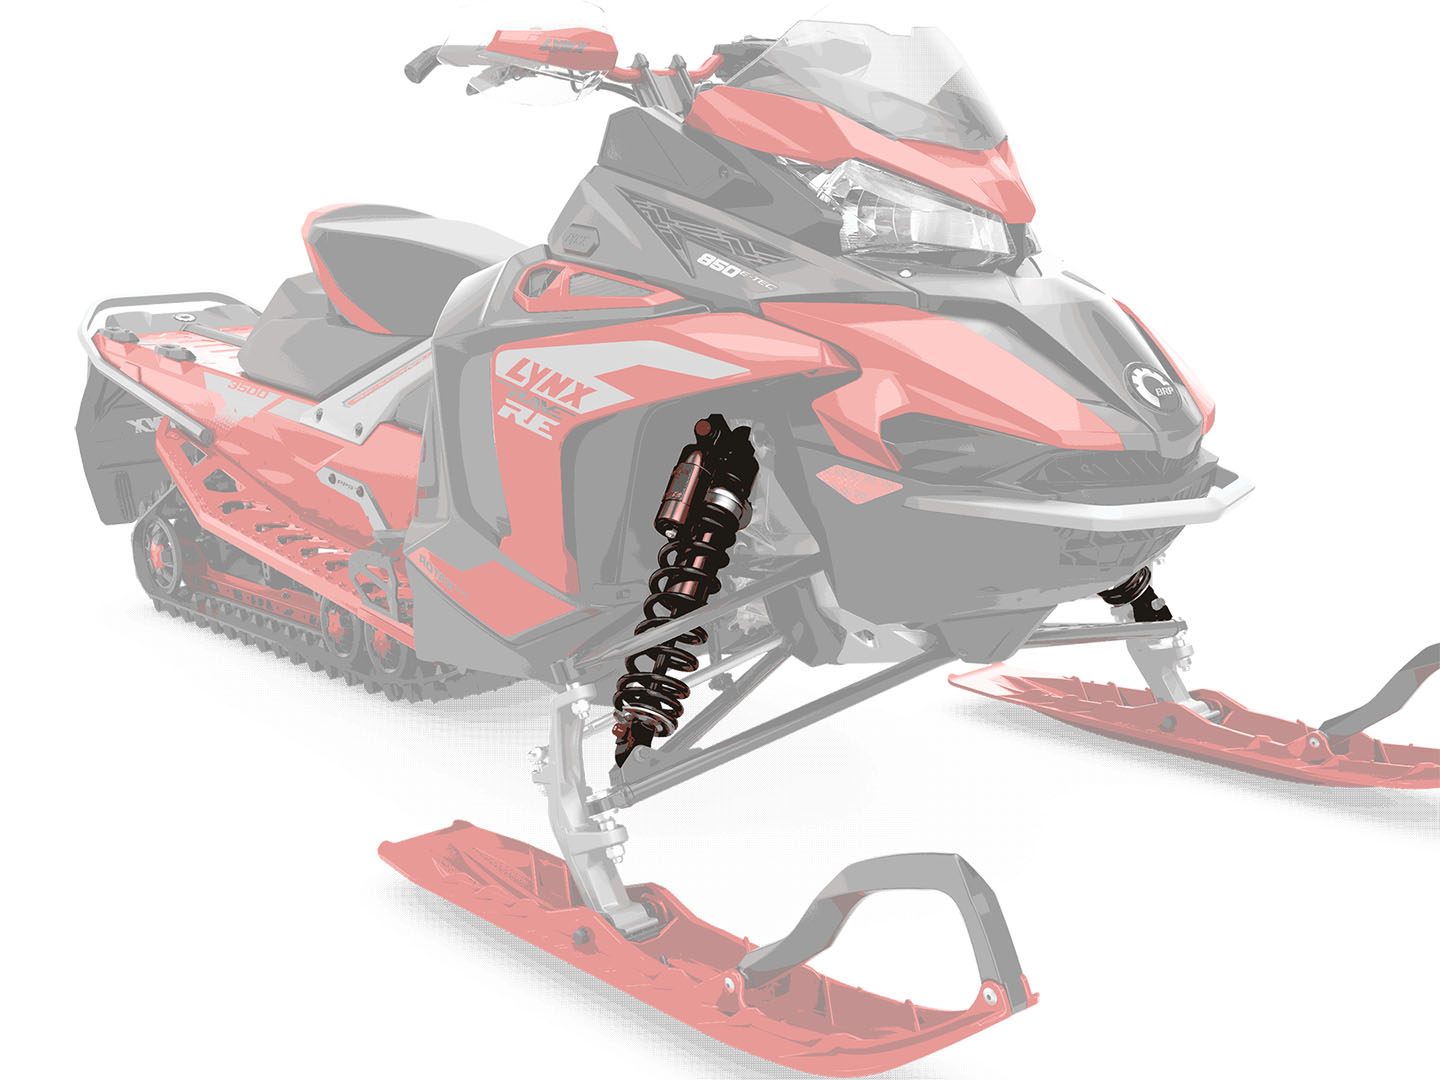 MORE STABILITY: LFS+ front suspension - The new LFS+ front suspension features more suspension travel and wider, 1097 mm ski stance, providing the Lynx Rave sport snowmobile with improved control and flatter cornering capability. - Photo 13